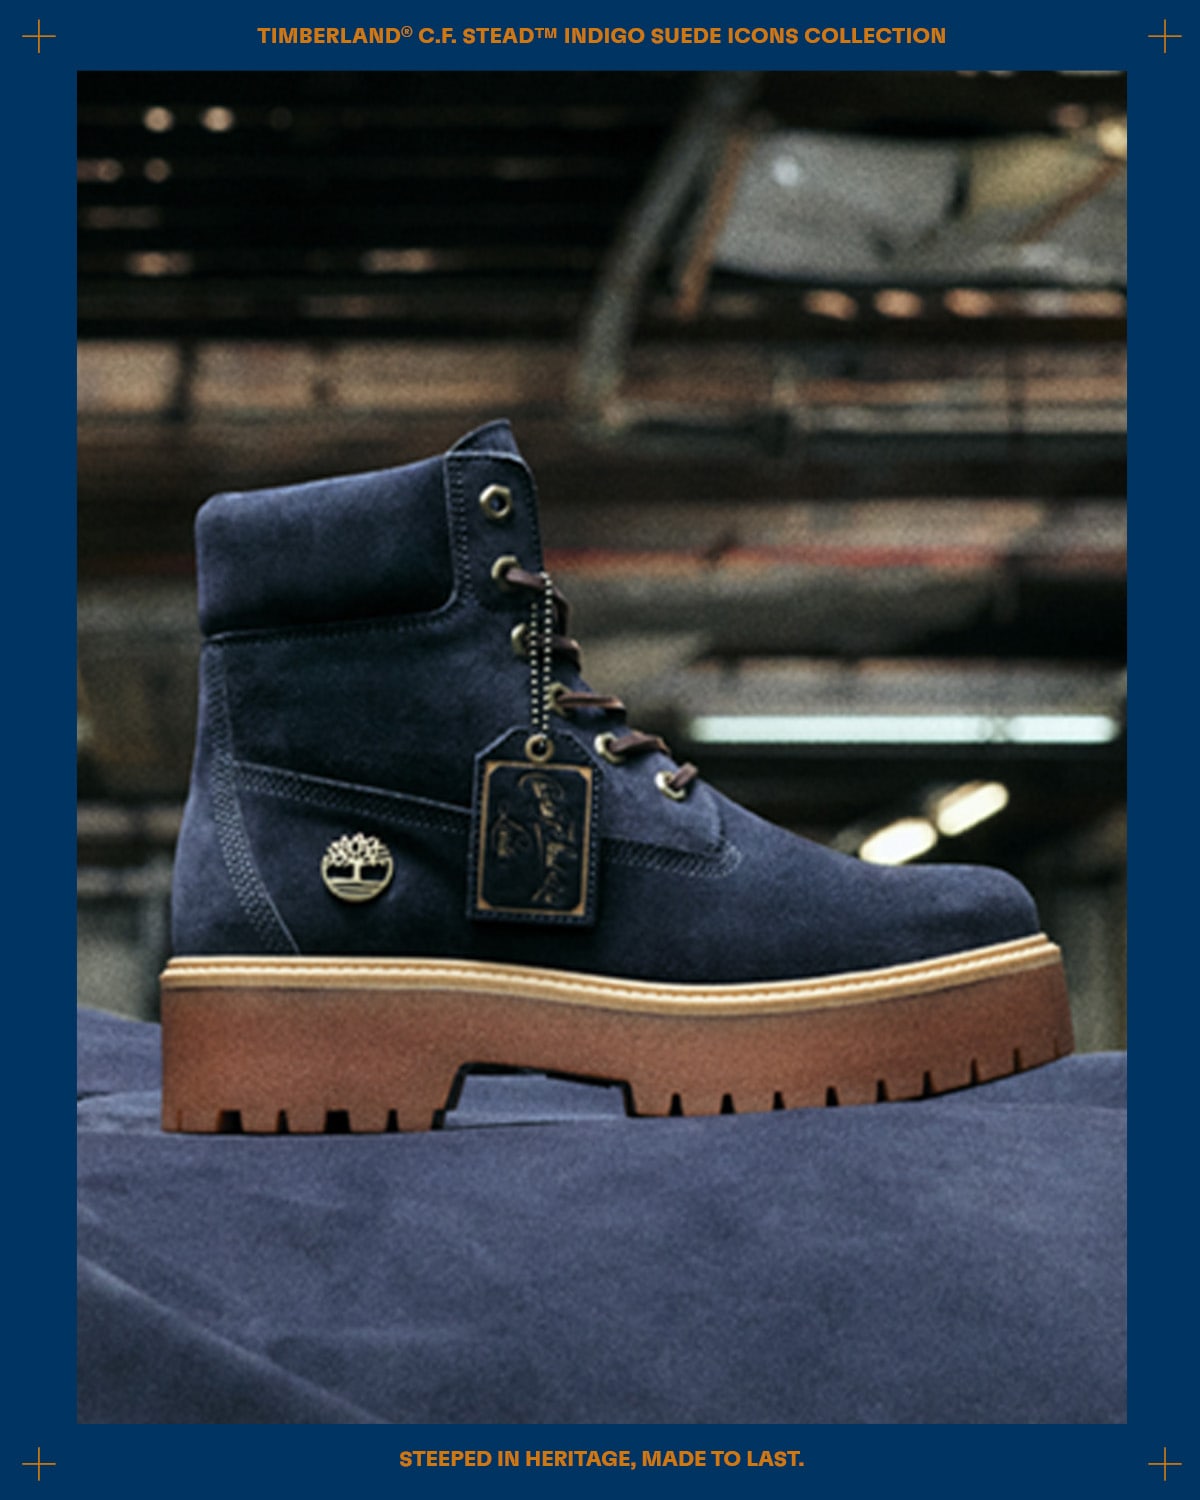 TIMBERLAND® C.F. STEAD™ INDIGO SUEDE ICONS COLLECTION